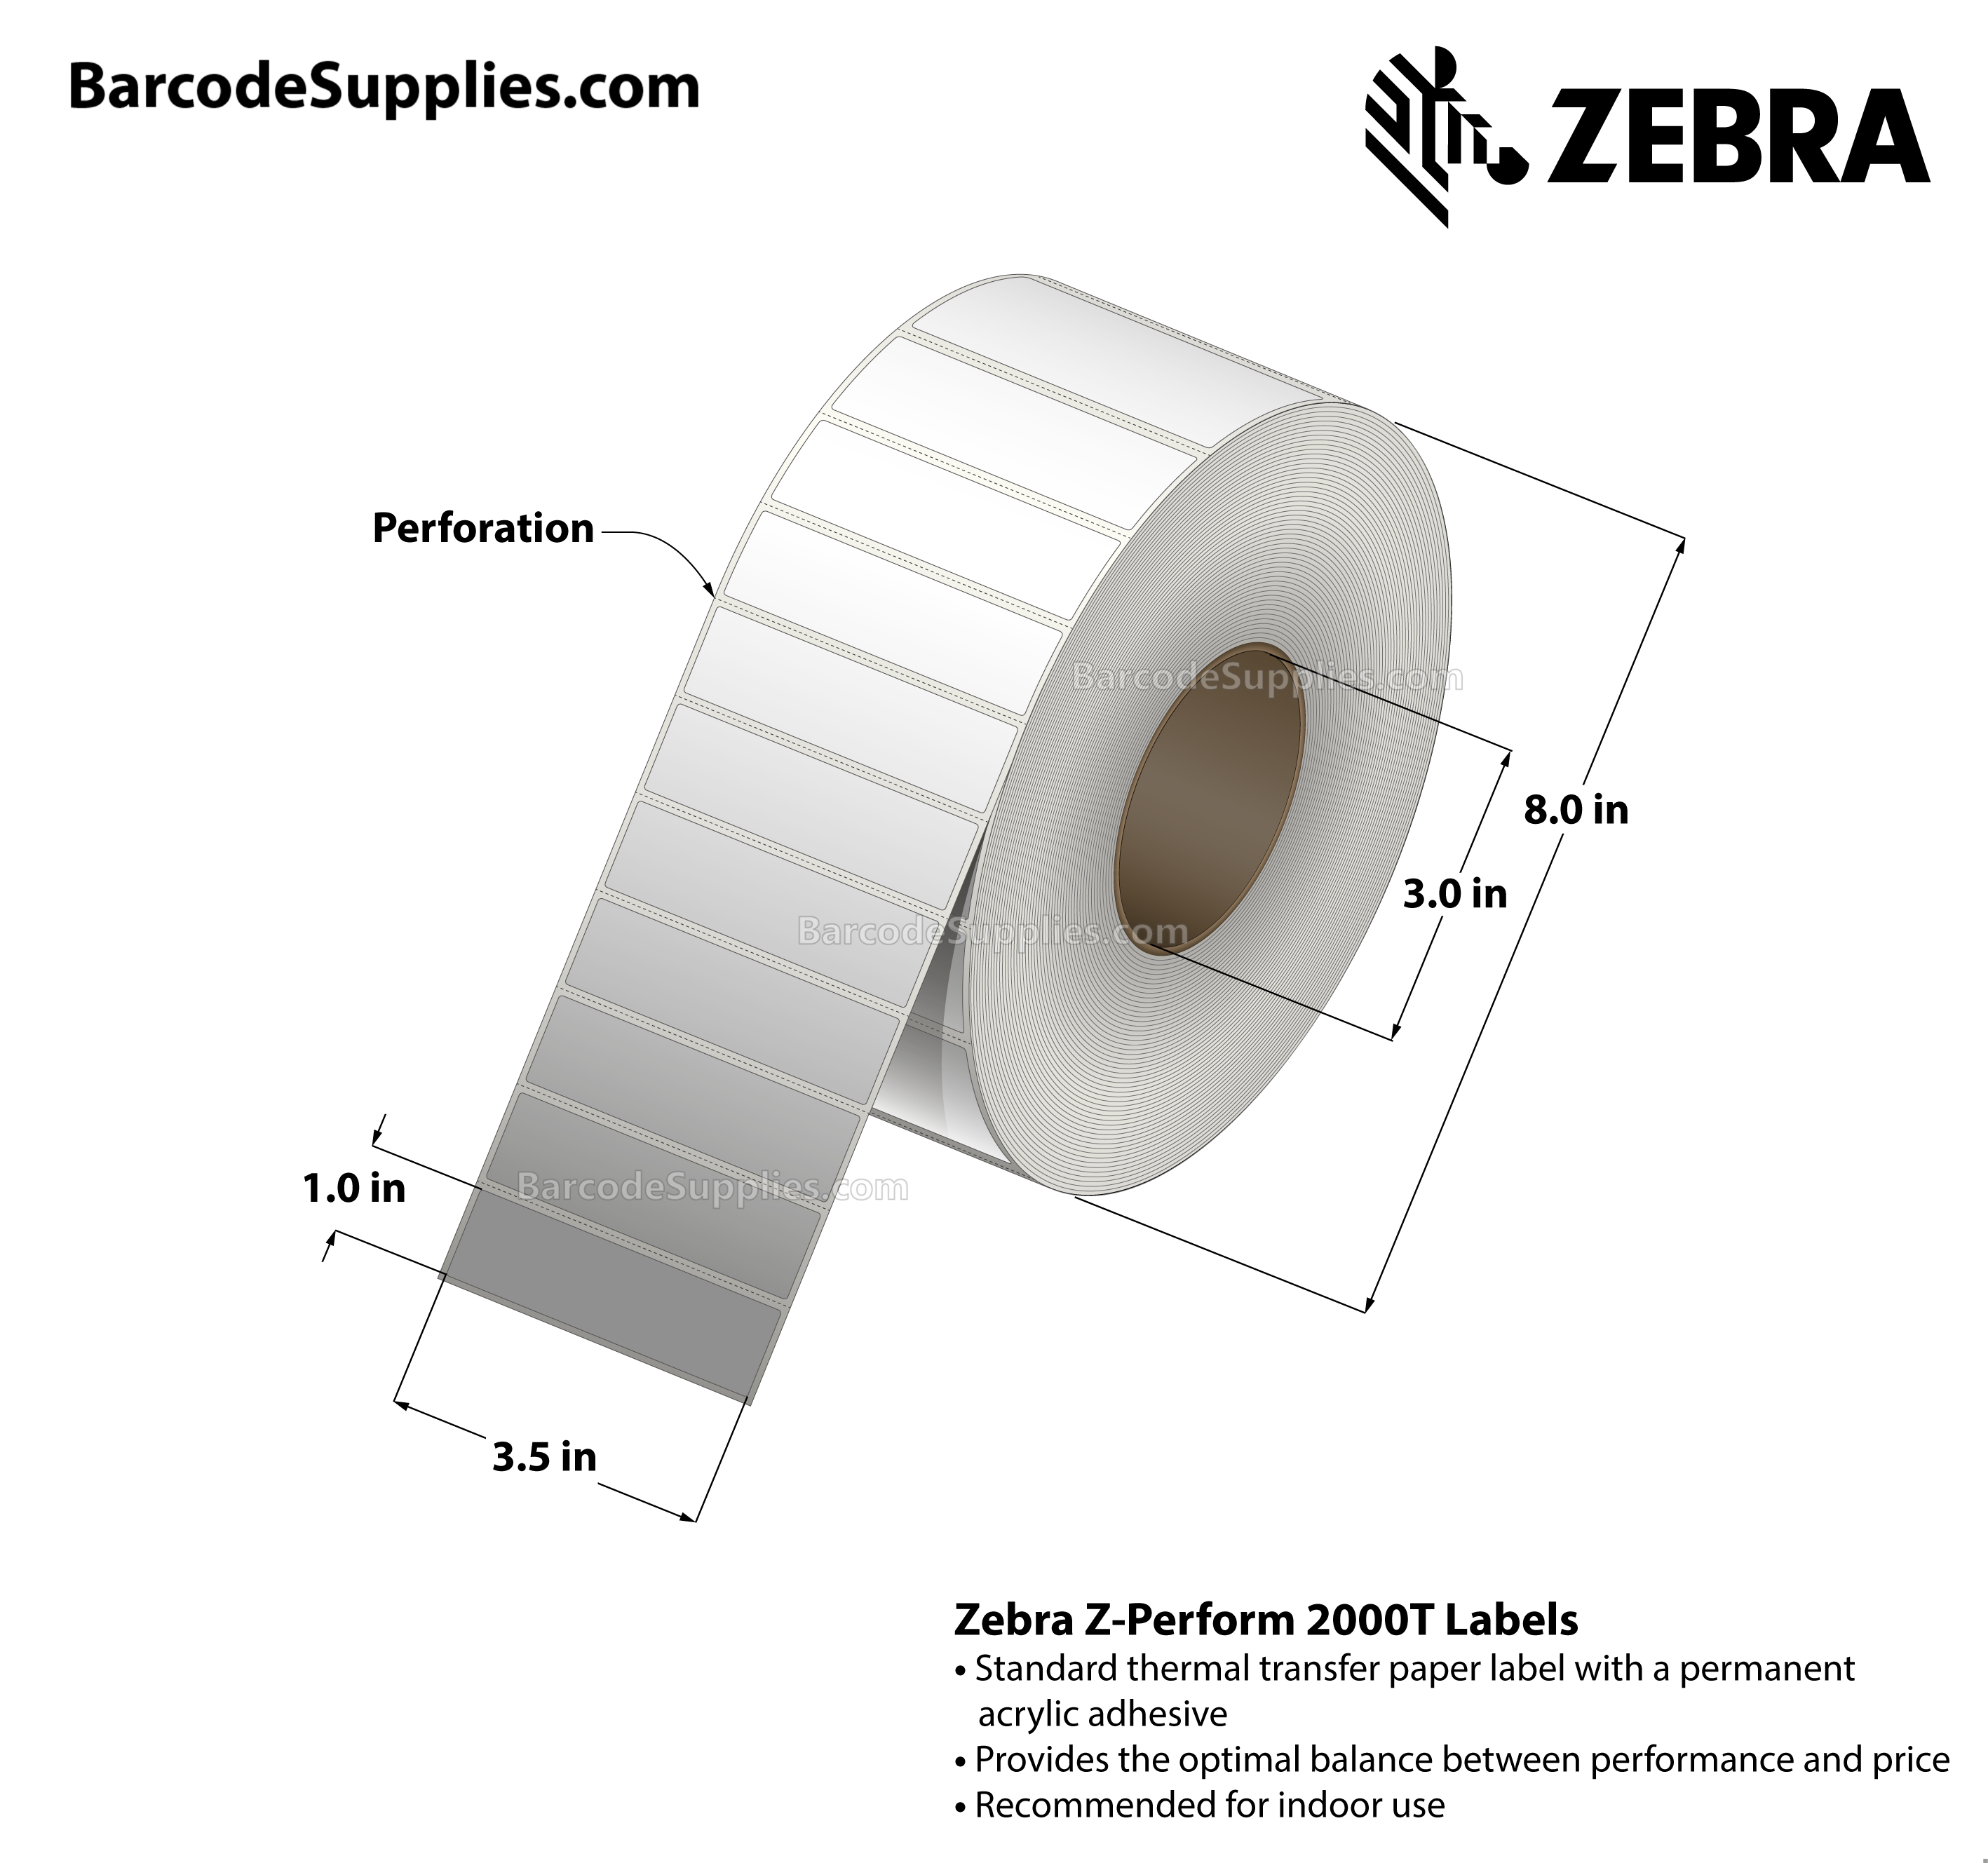 3.5 x 1 Thermal Transfer White Z-Perform 2000T Labels With Permanent Adhesive - Perforated - 5470 Labels Per Roll - Carton Of 4 Rolls - 21880 Labels Total - MPN: 10010243